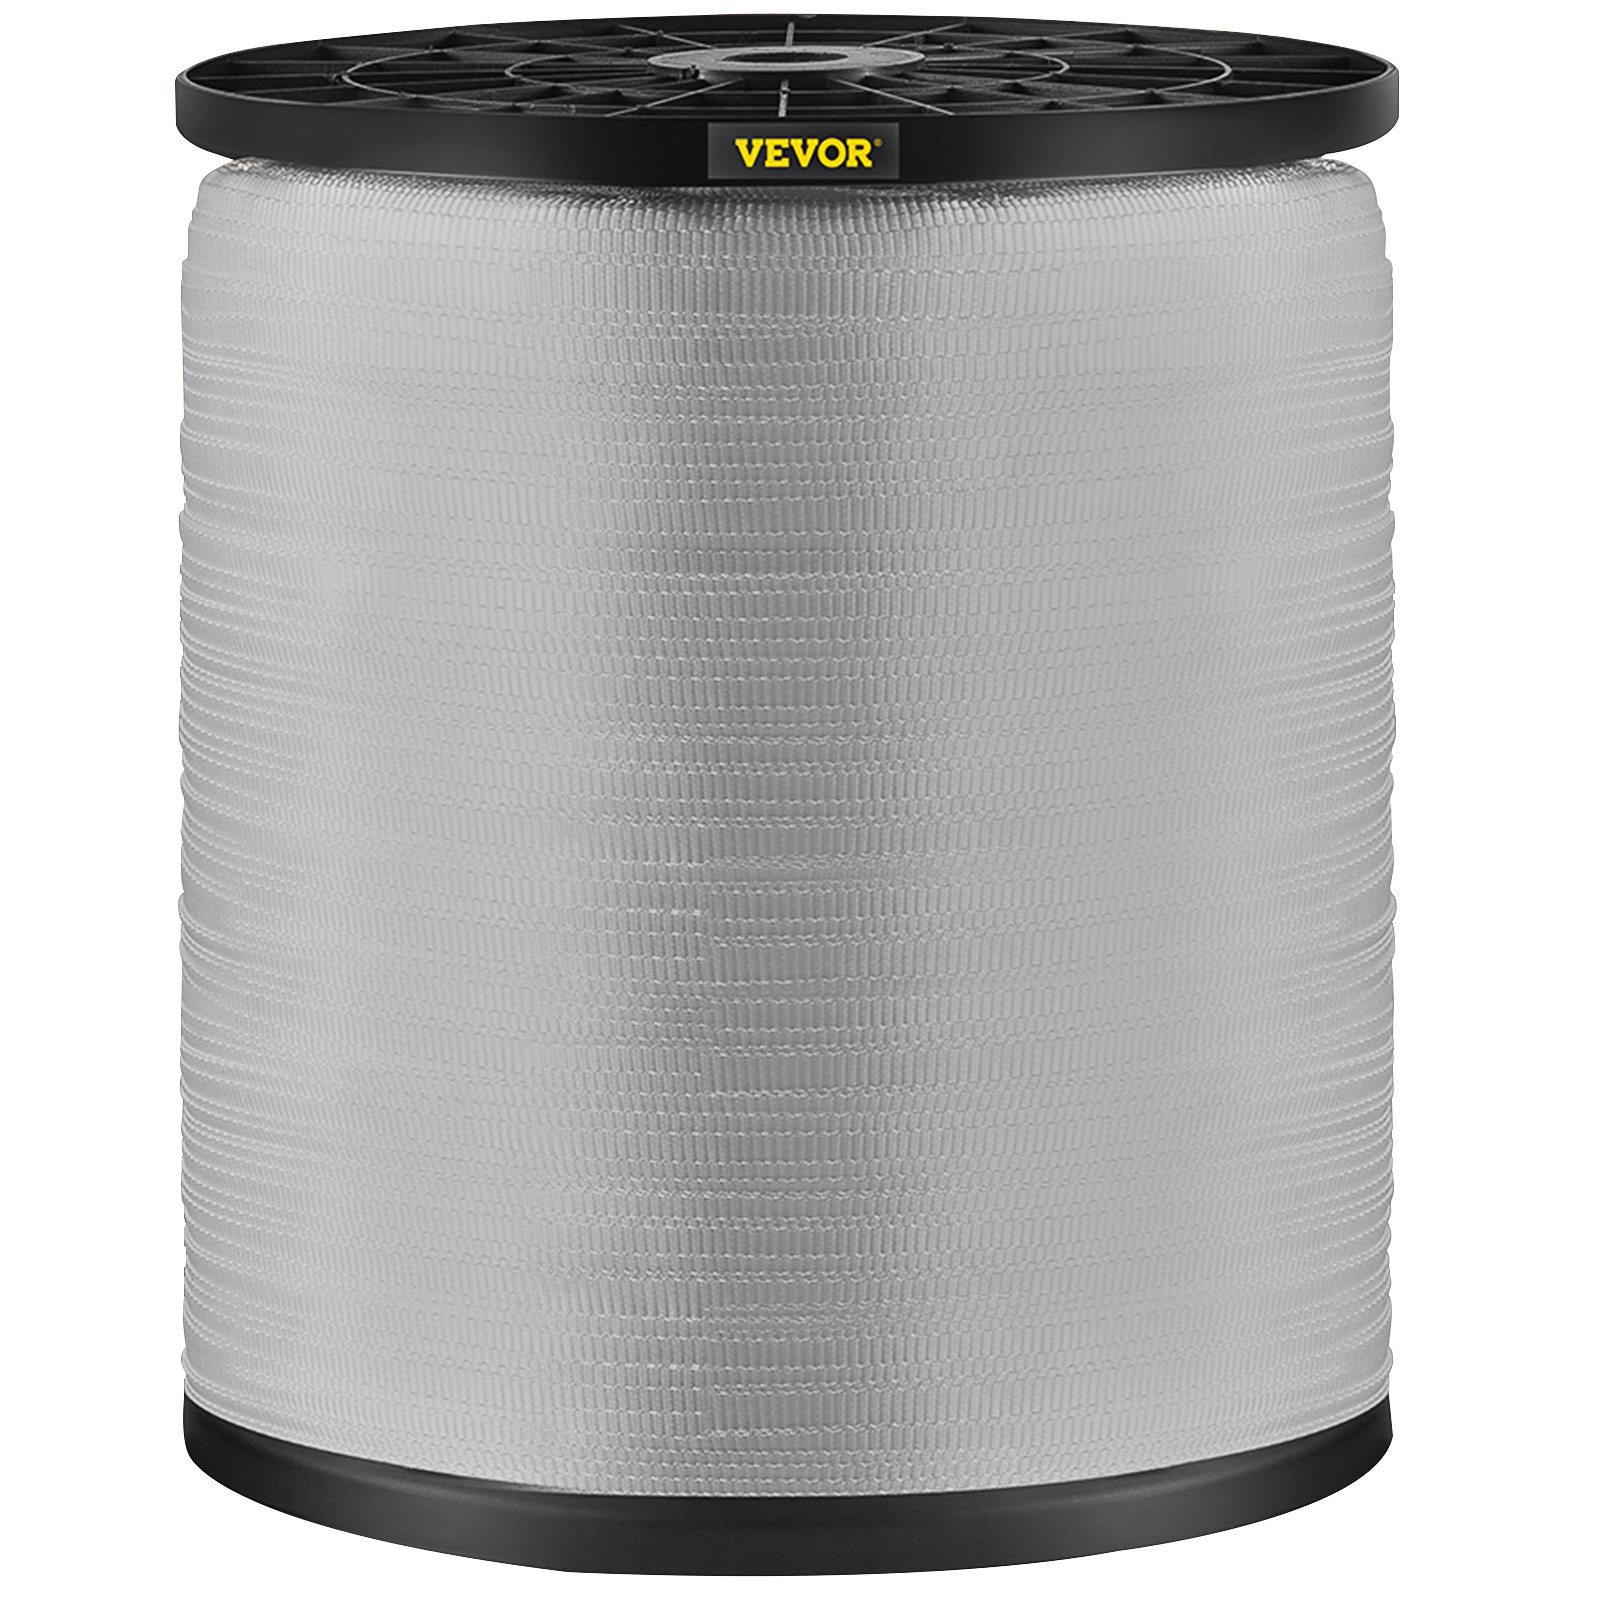 Vevor Polyester Pull Tape, 2500 Lbs Tensile Capacity, Professional Flat Rope 3153' X 3/4" Extended Reel, Polyester Webbing Suitable For Packaging In Crafting, Gardening And Commercial Electrical от Vevor Many GEOs